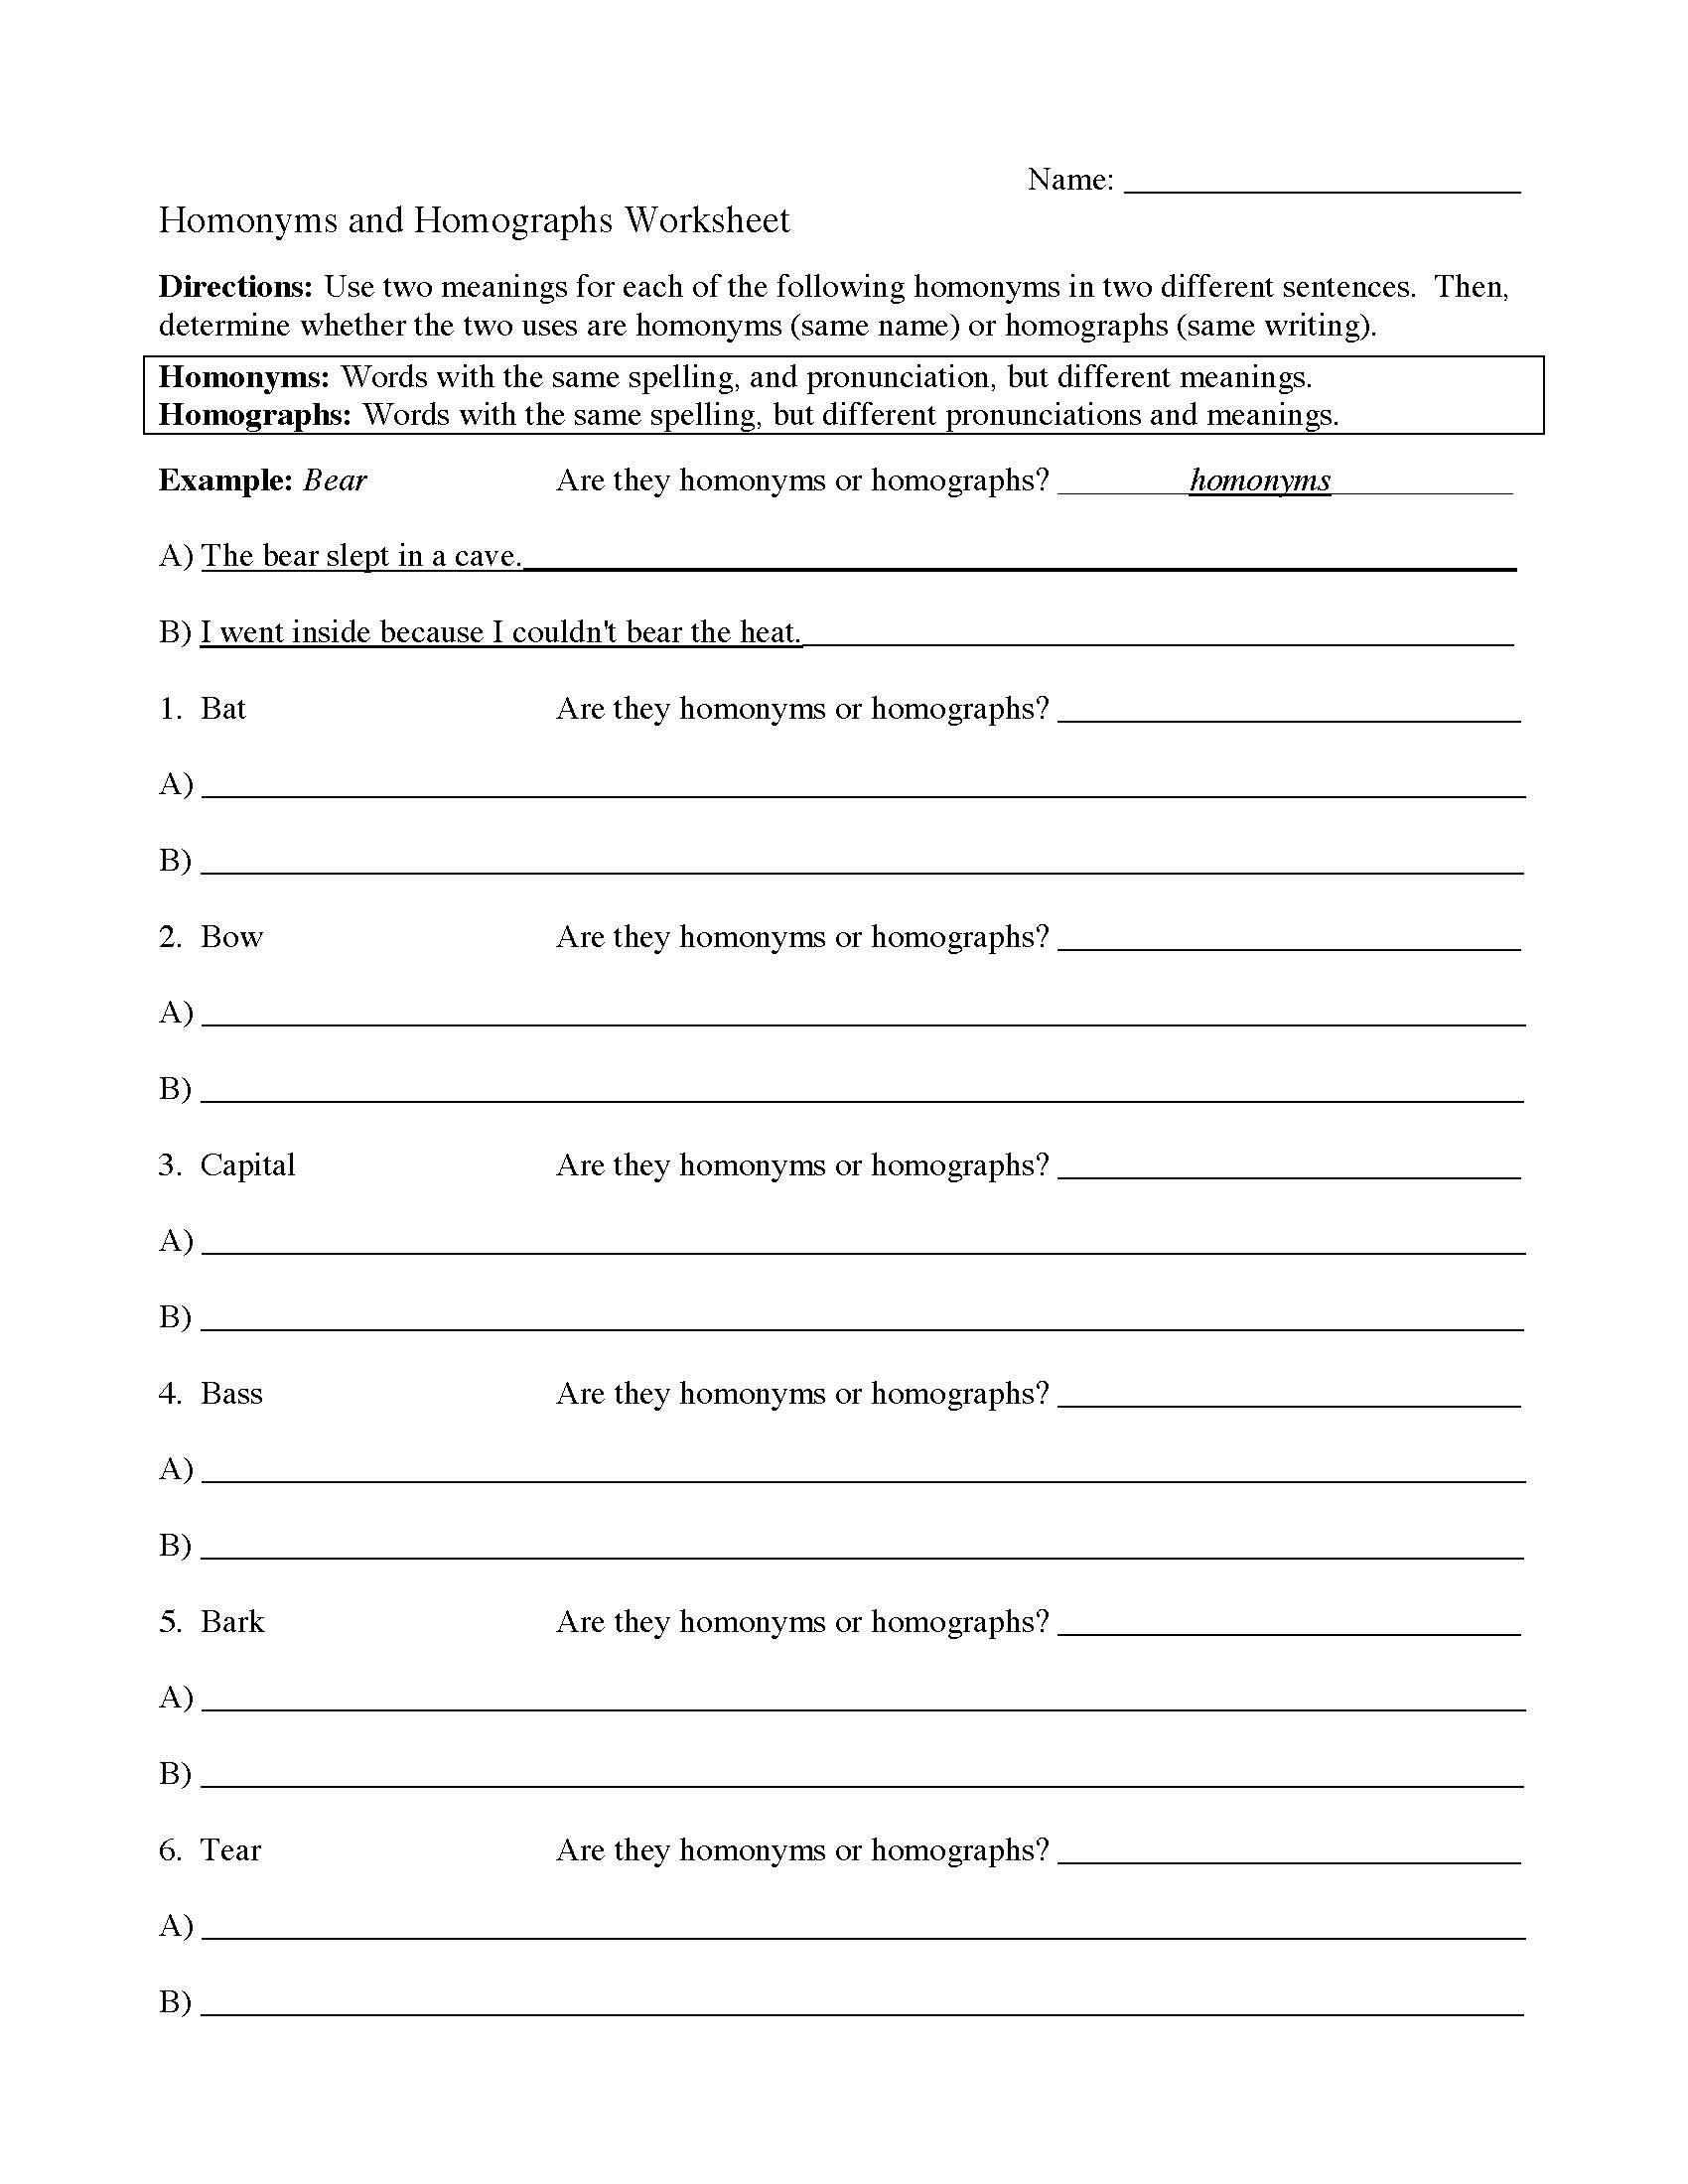 homonyms-and-homographs-worksheet-1-preview